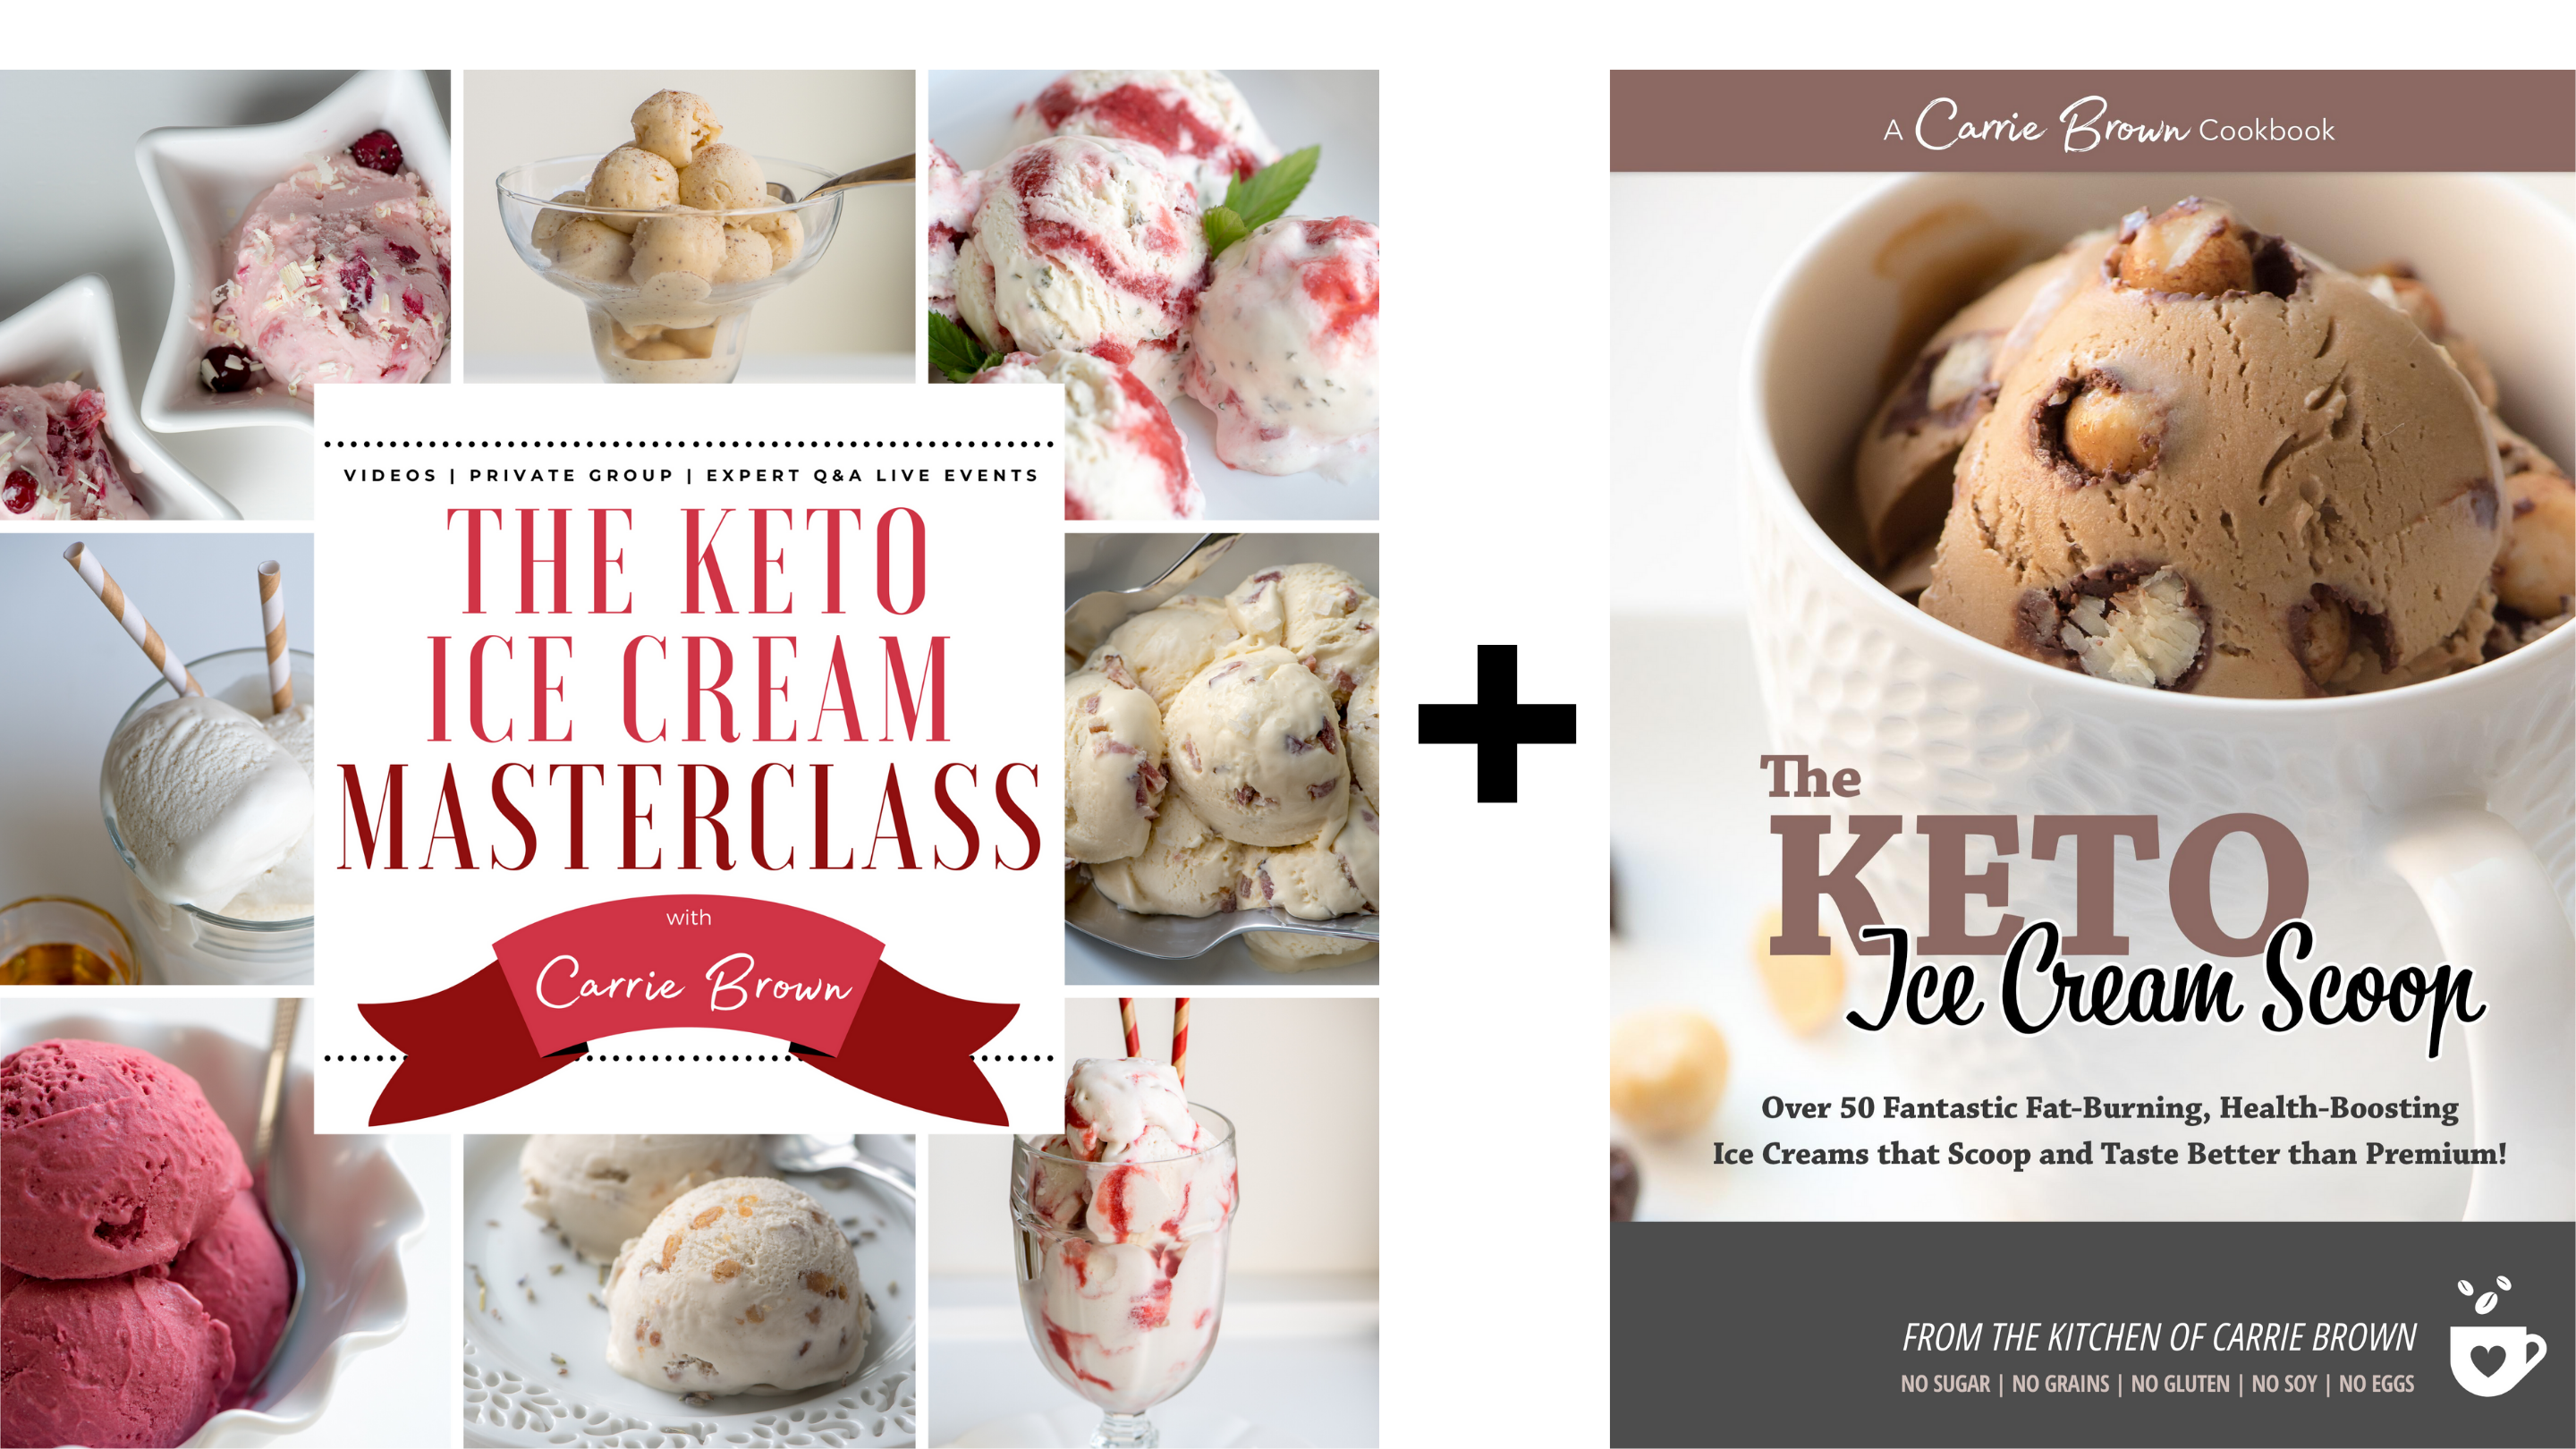 How To Make The Best Keto Ice Cream